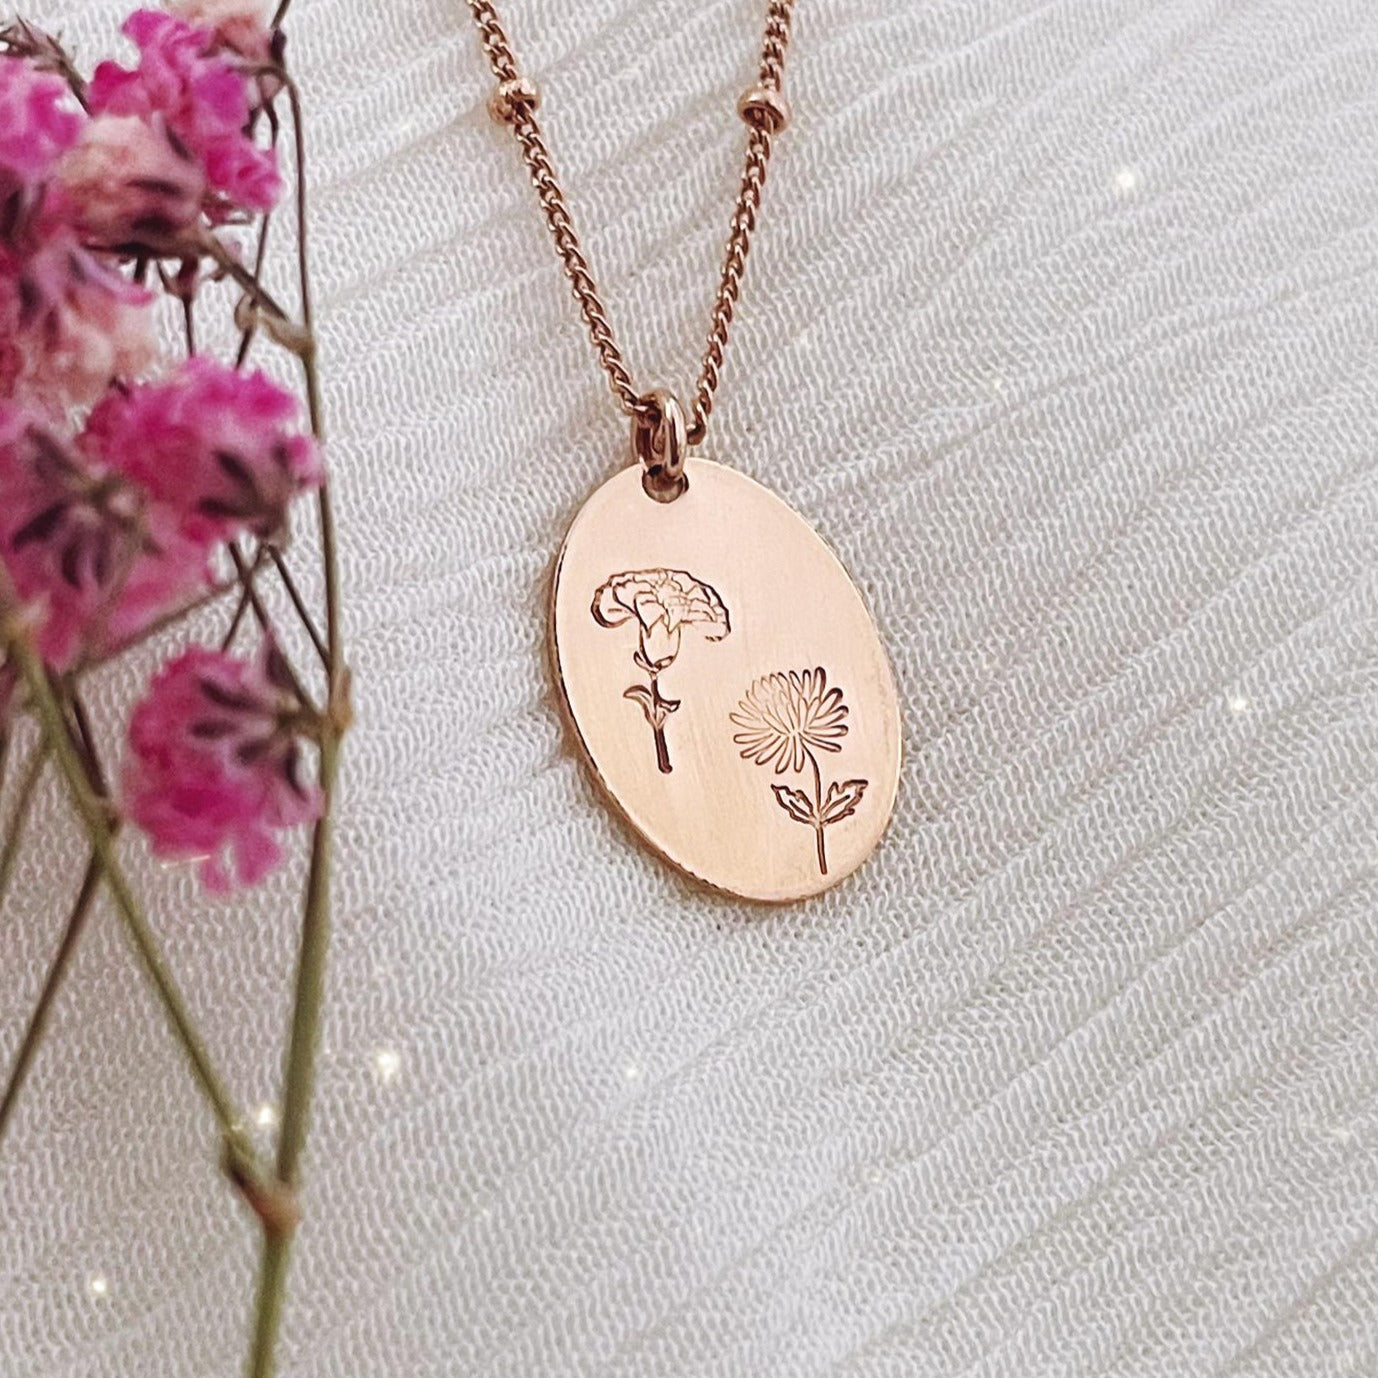 Birth Flowers Necklace - 2 Flowers - Oval Disc